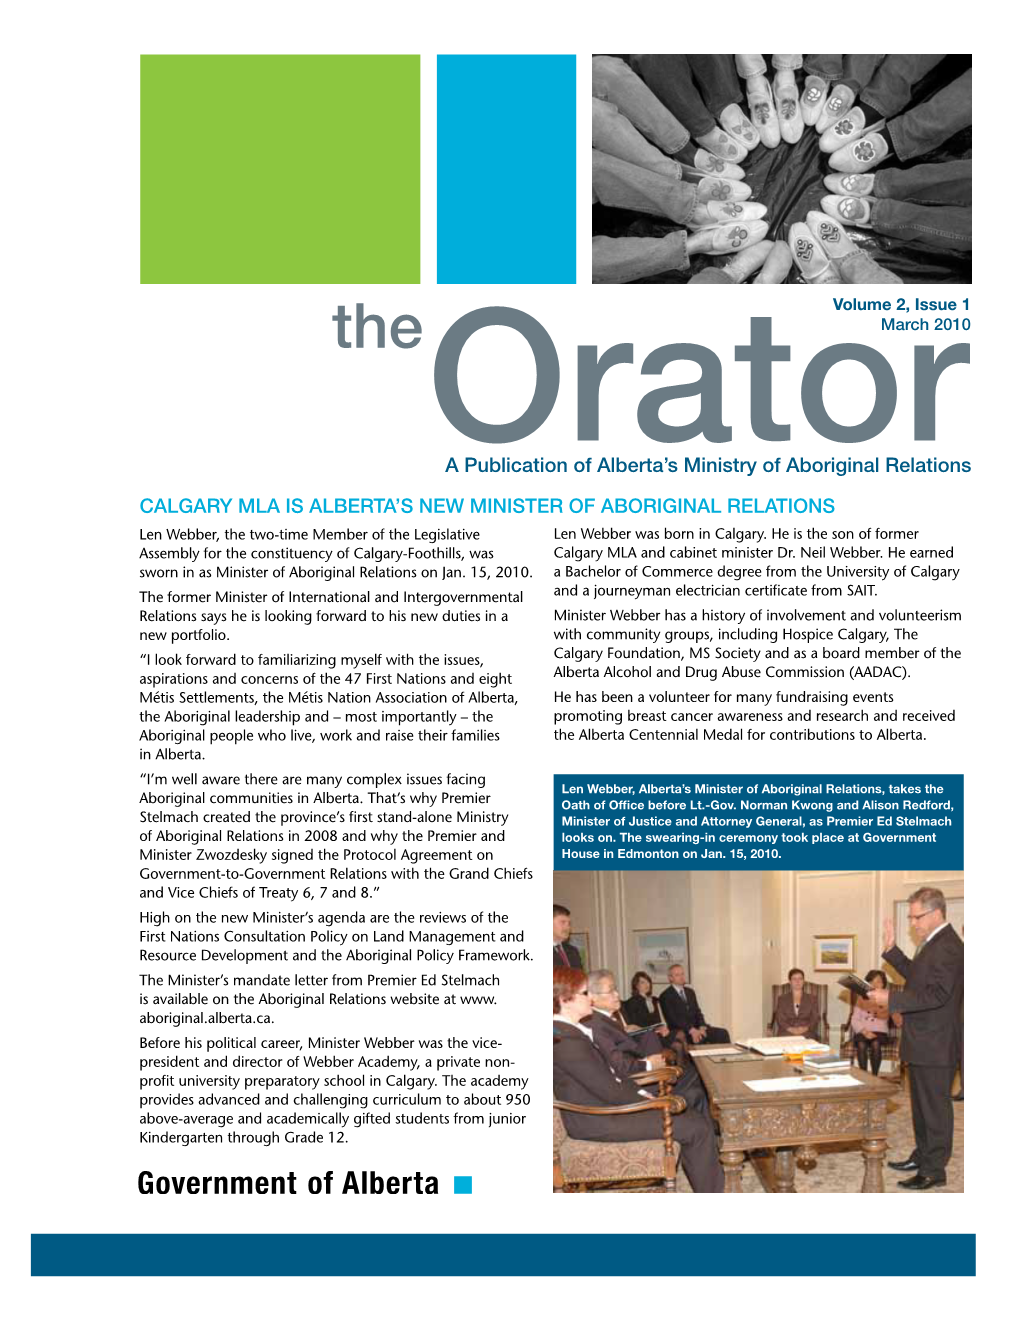 The Orator Newsletter March 2010